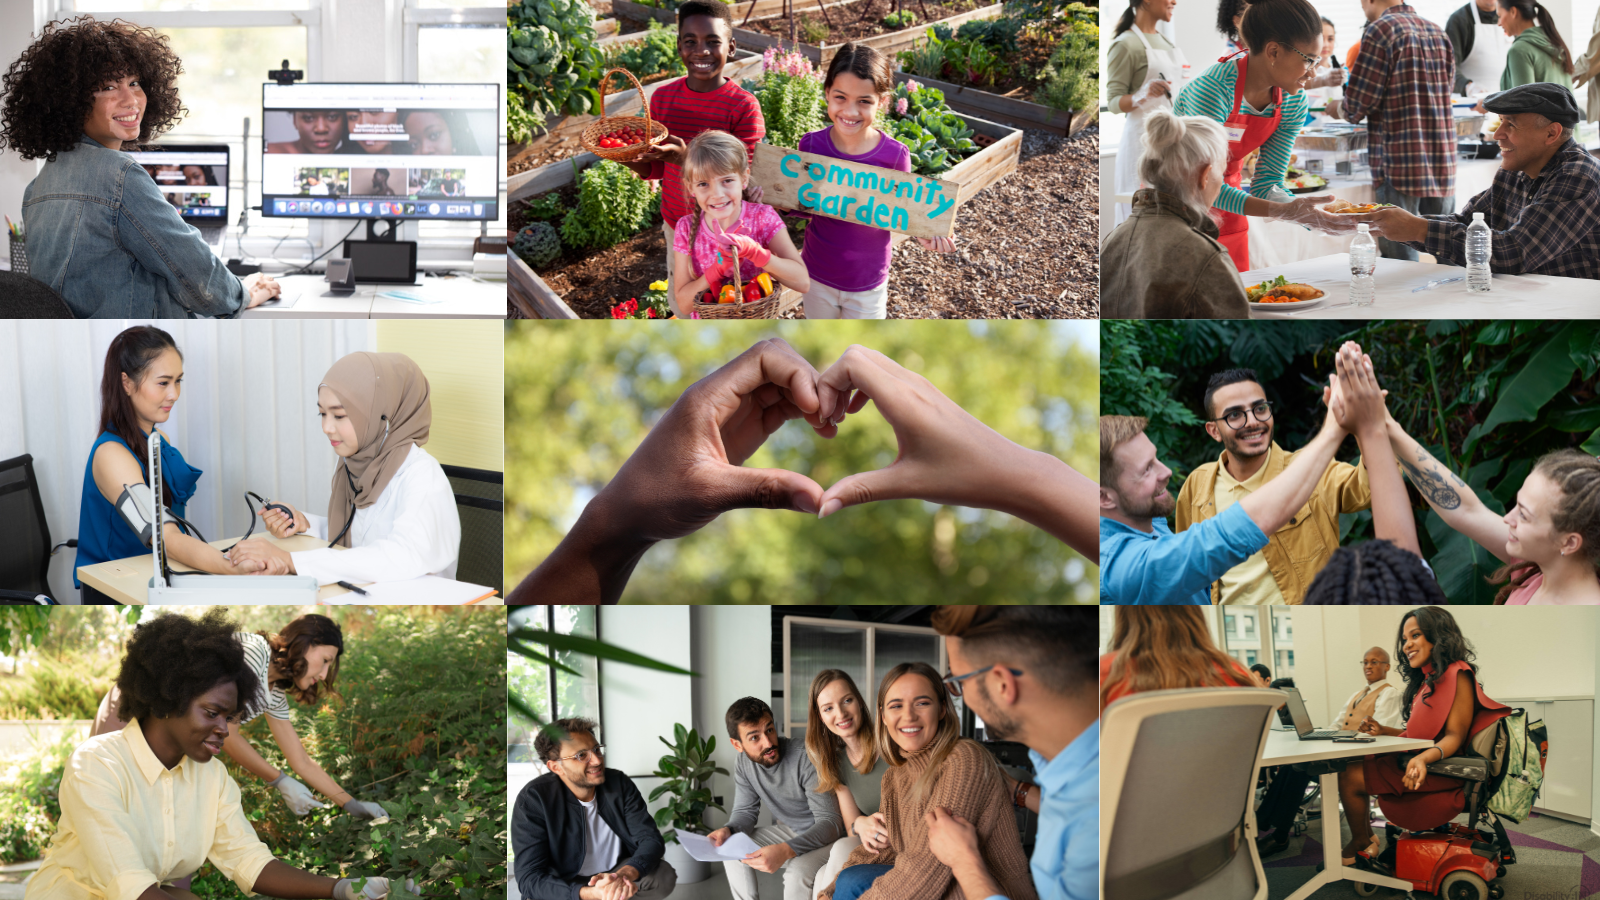 Collage of images to depict communities served by nonprofits.